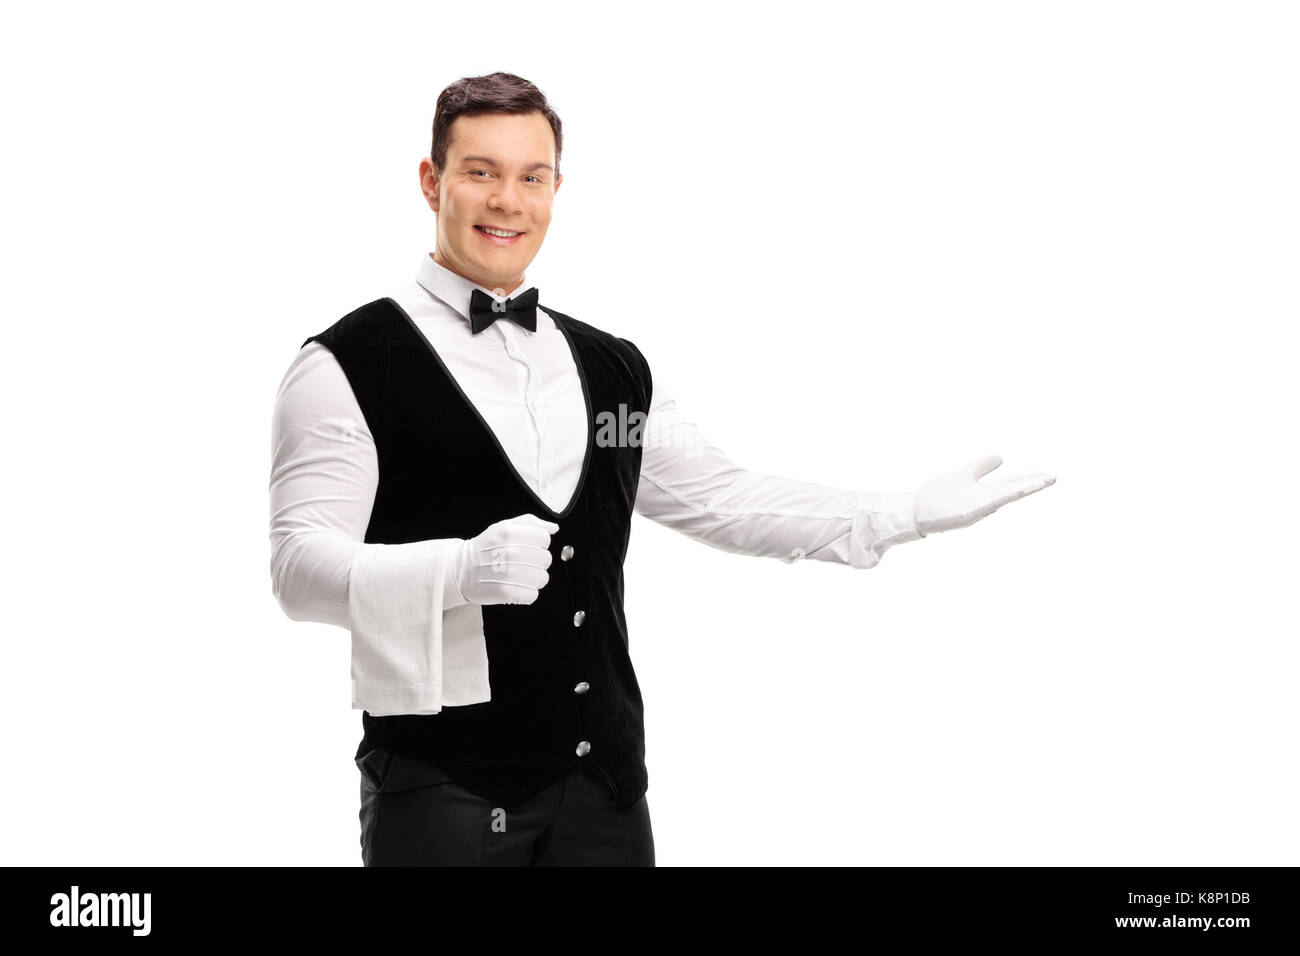 Waiter gesturing with his hand isolated on white background Stock Photo